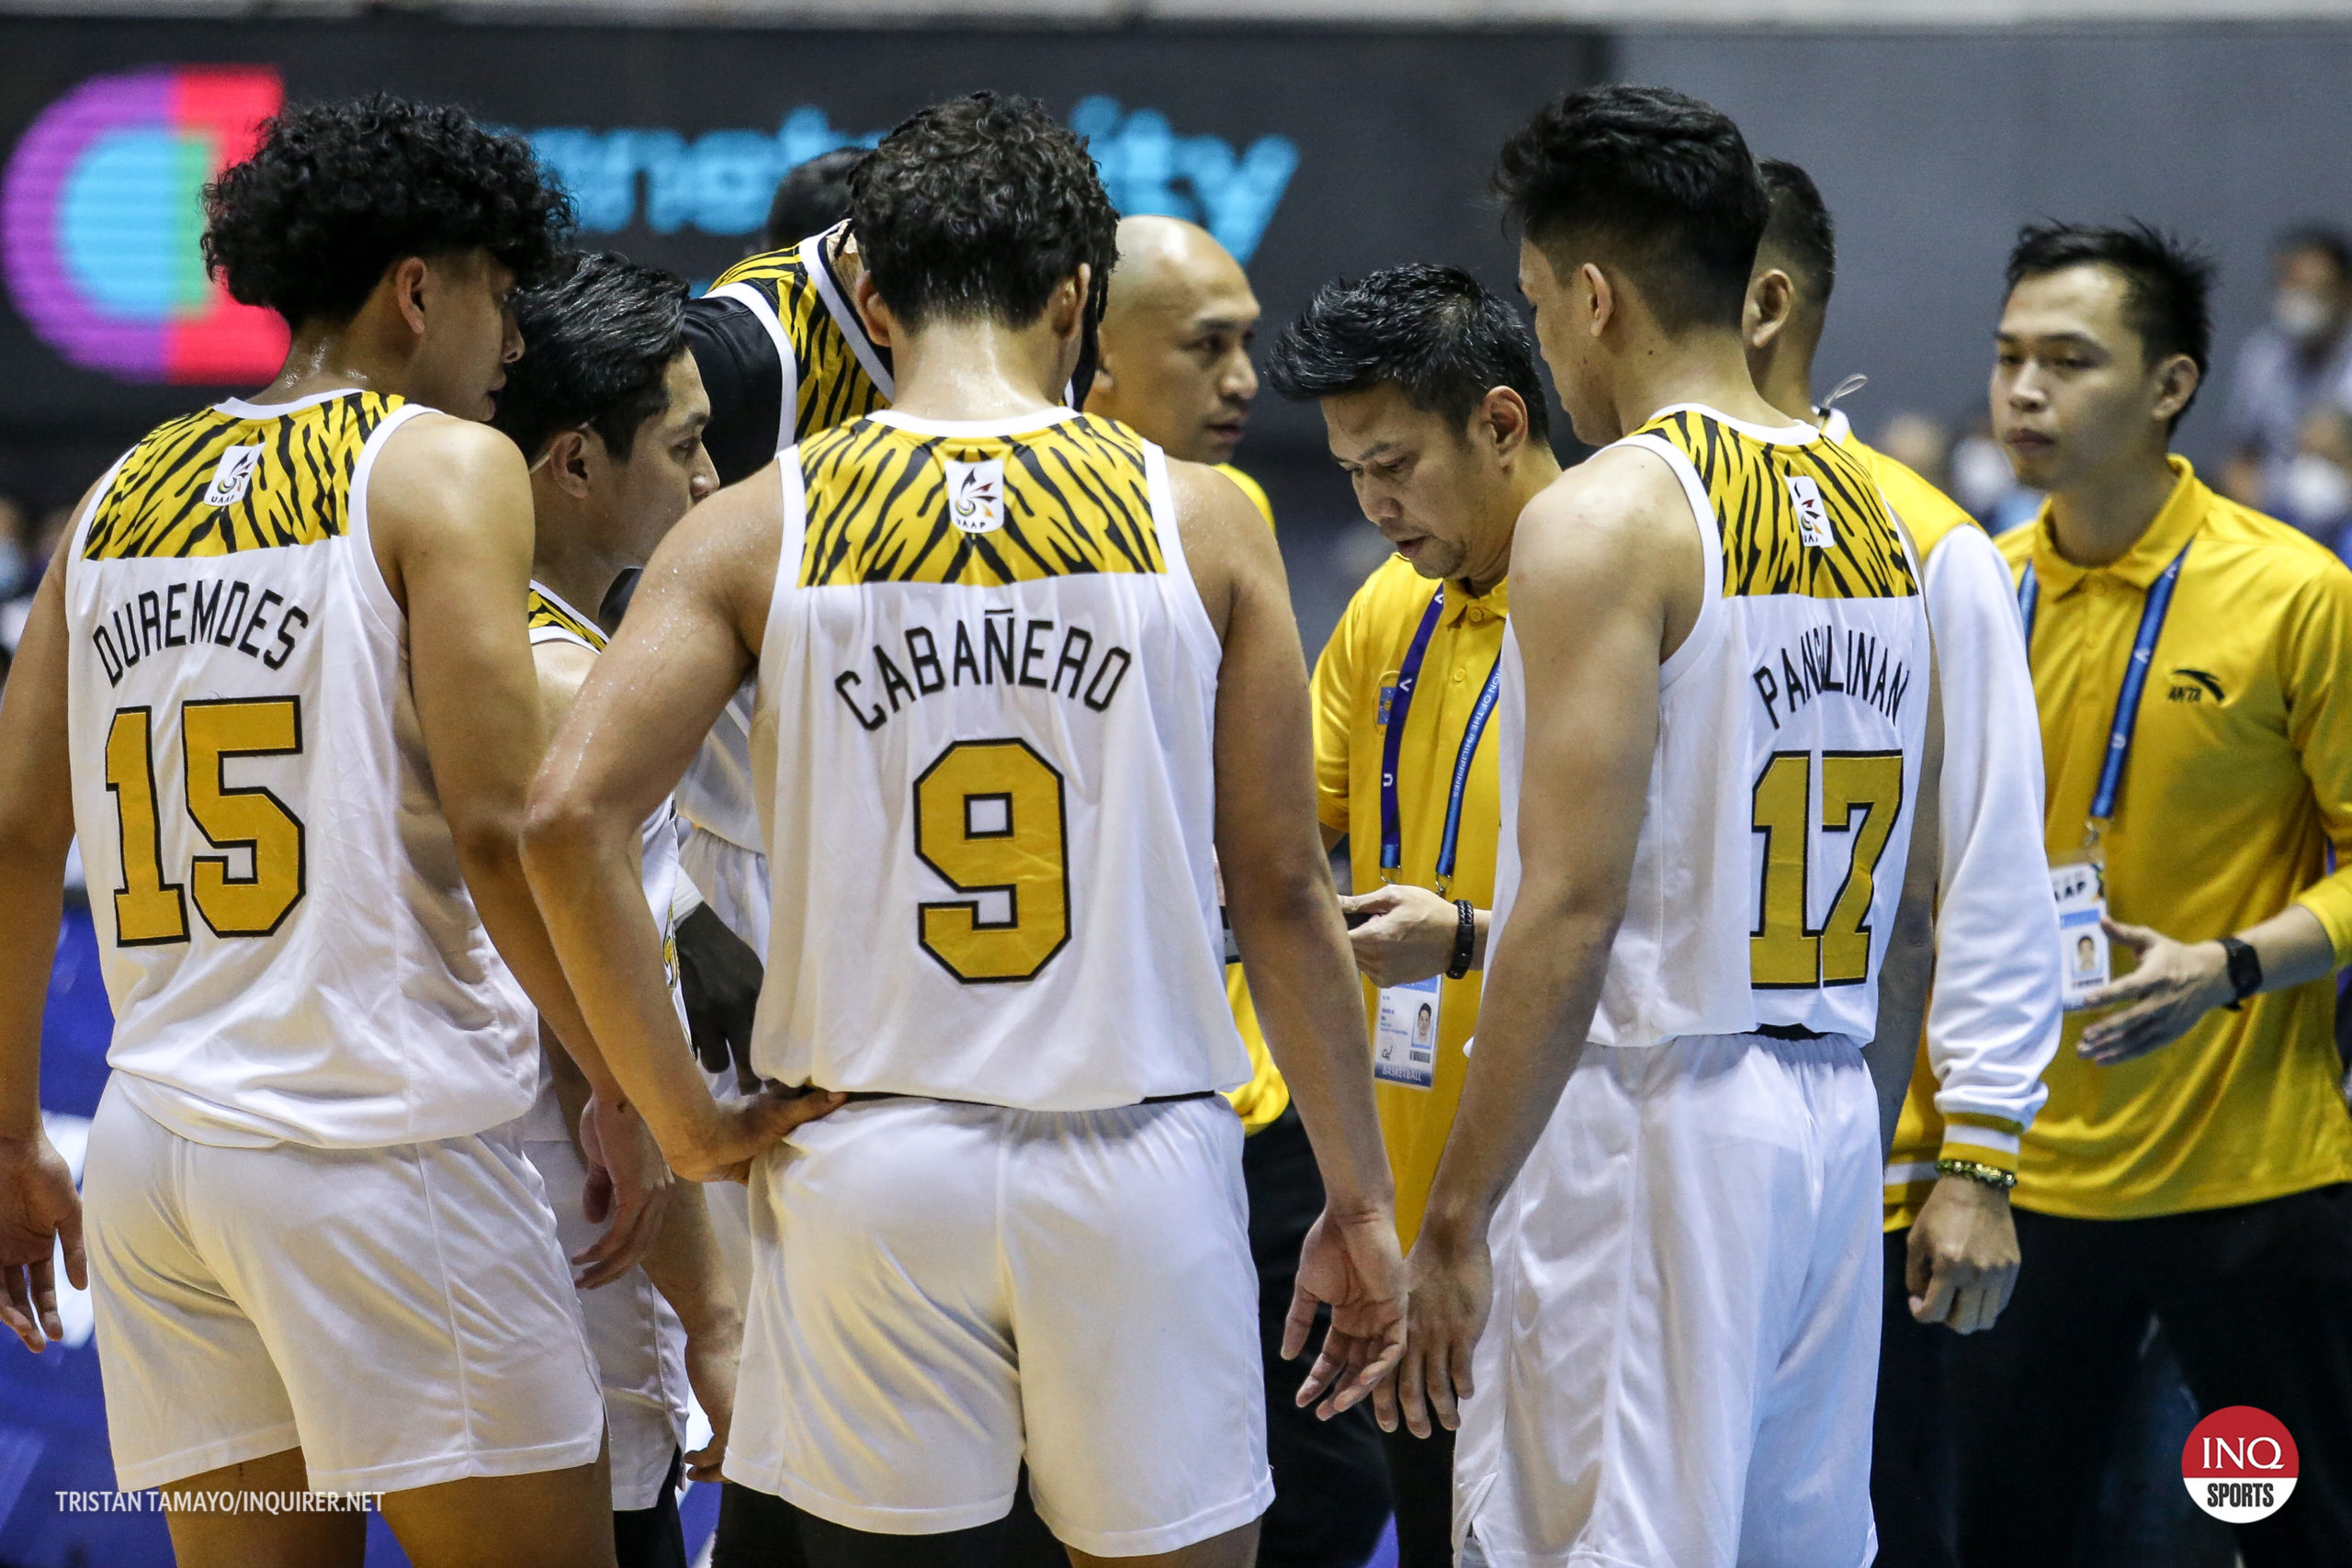 UST coach Bal David during a huddle. Photo by Tristan Tamayo/INQUIRER.net